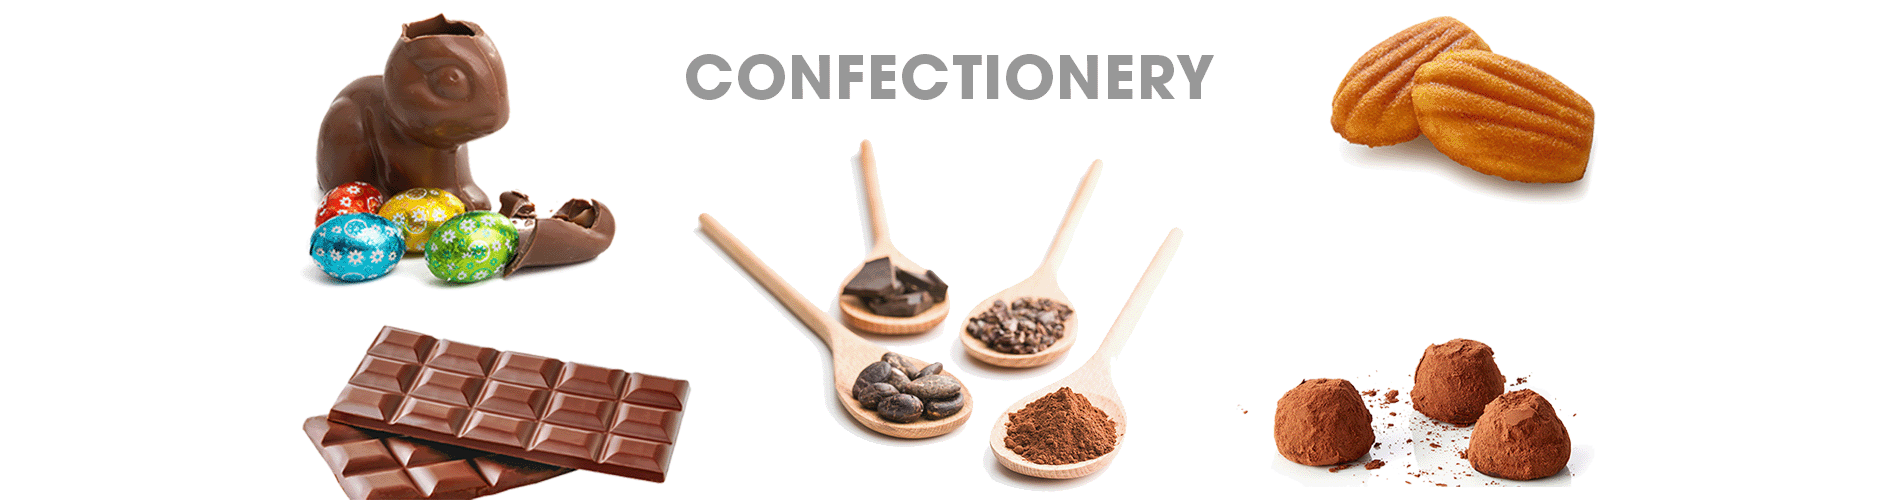 Category - Confectionery 1900x500